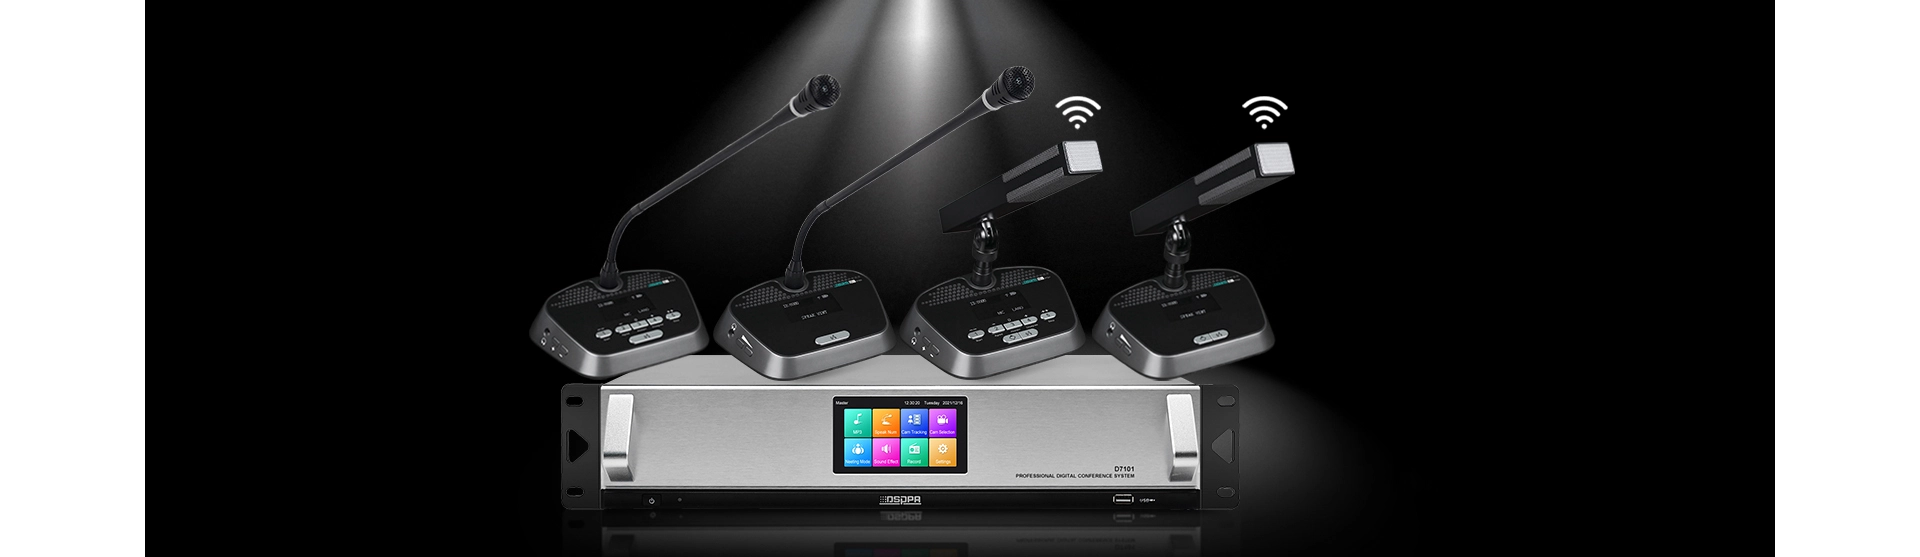 Wireless Conference System Software